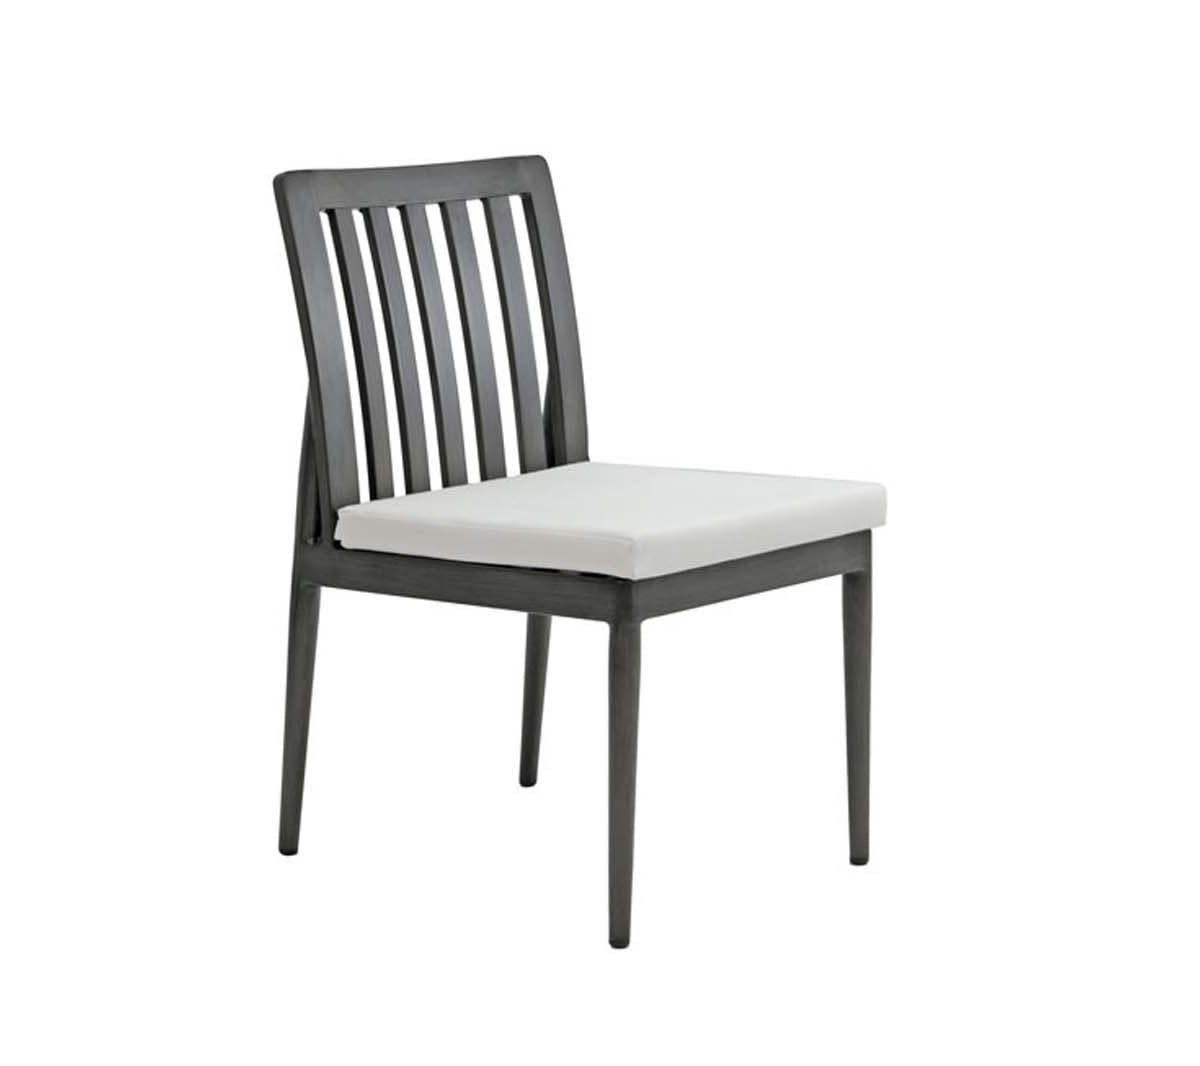 Bolano Dining Side Chair